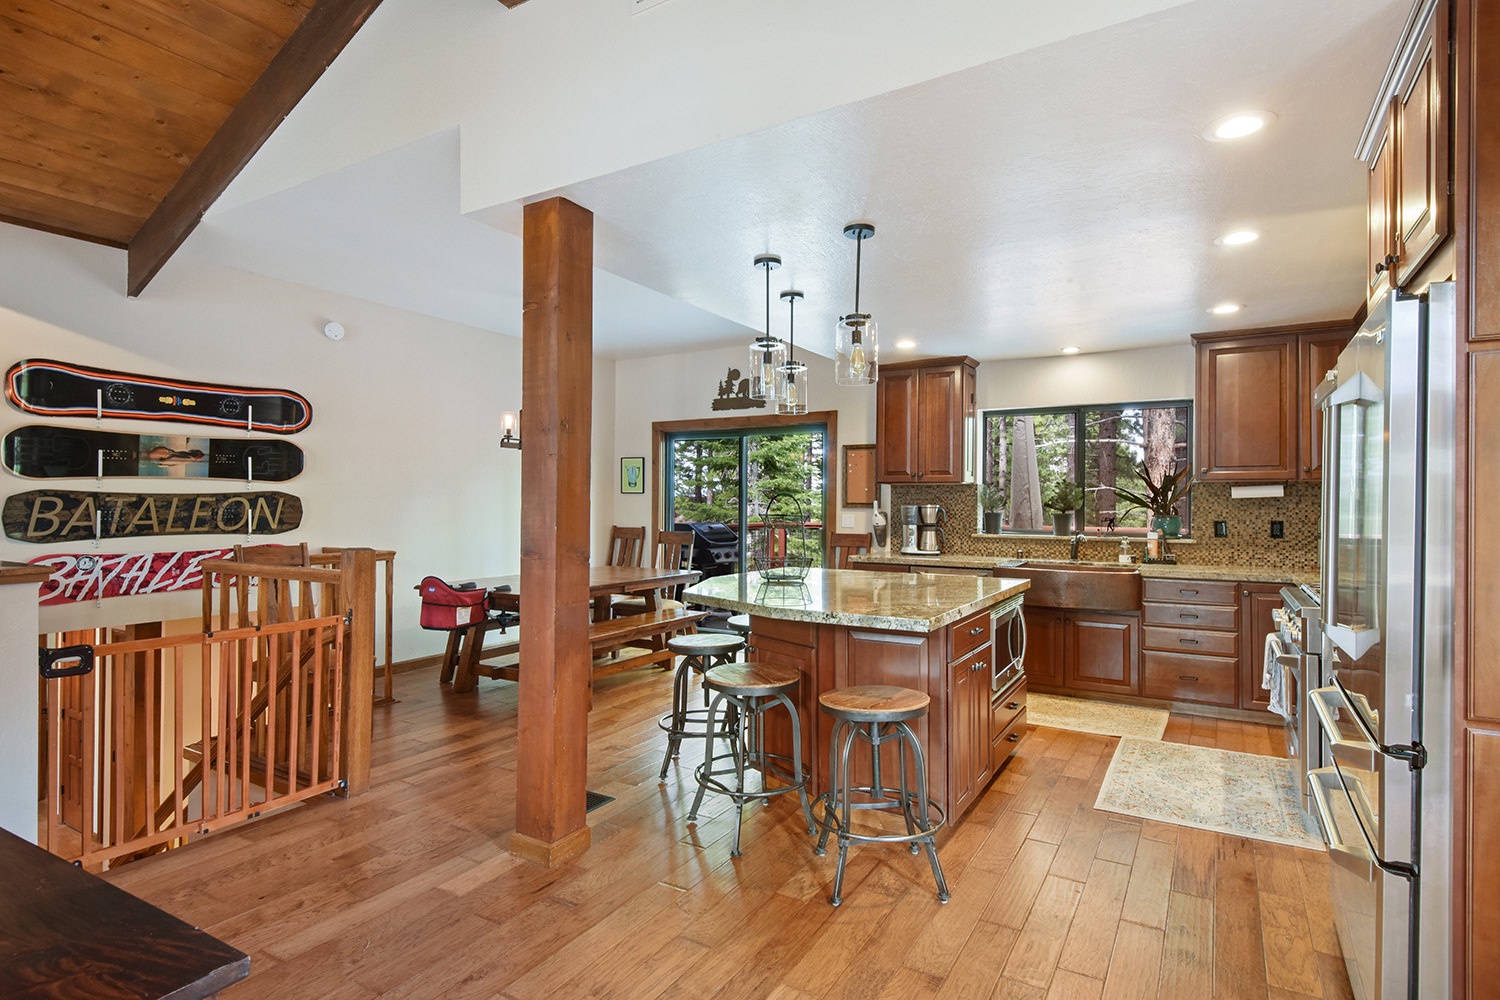 Large open dining and kitchen space with back deck access